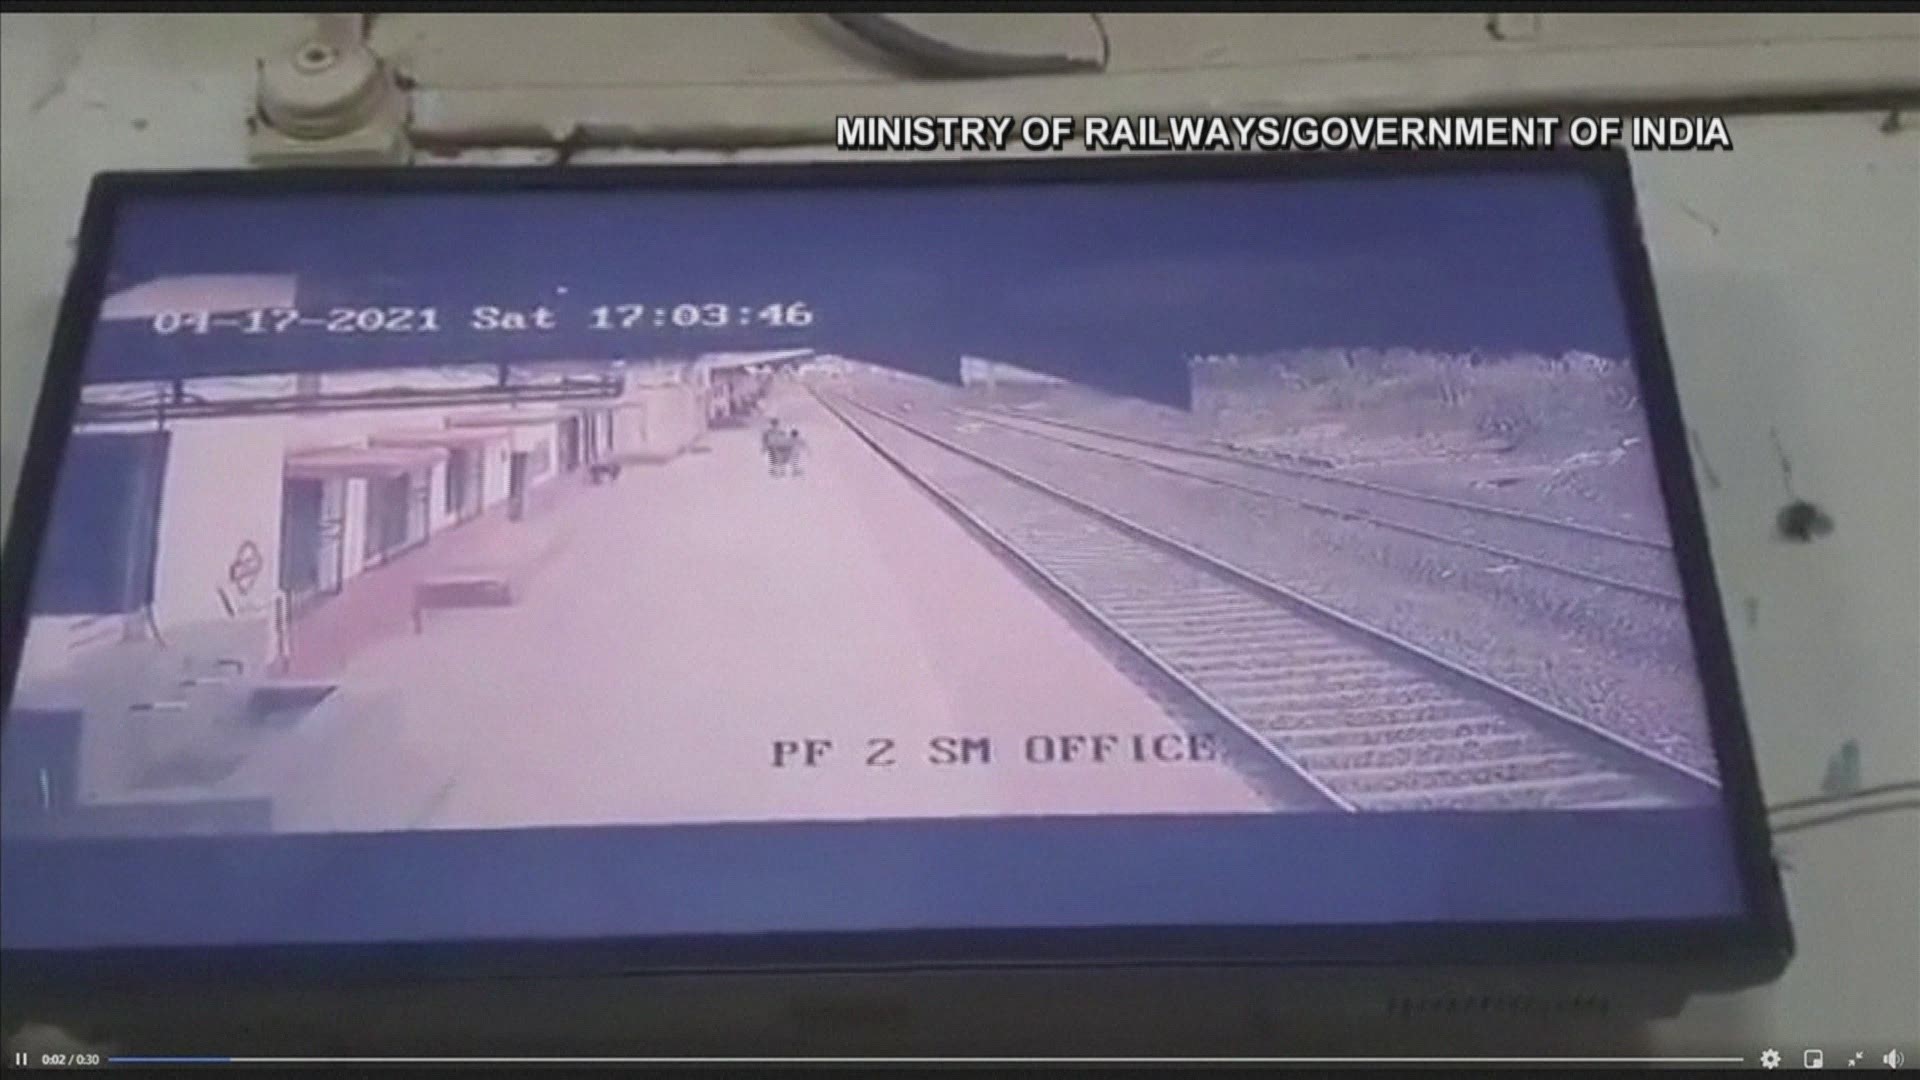 Security cameras captured the rescue of a child from train tracks in Mumbai.